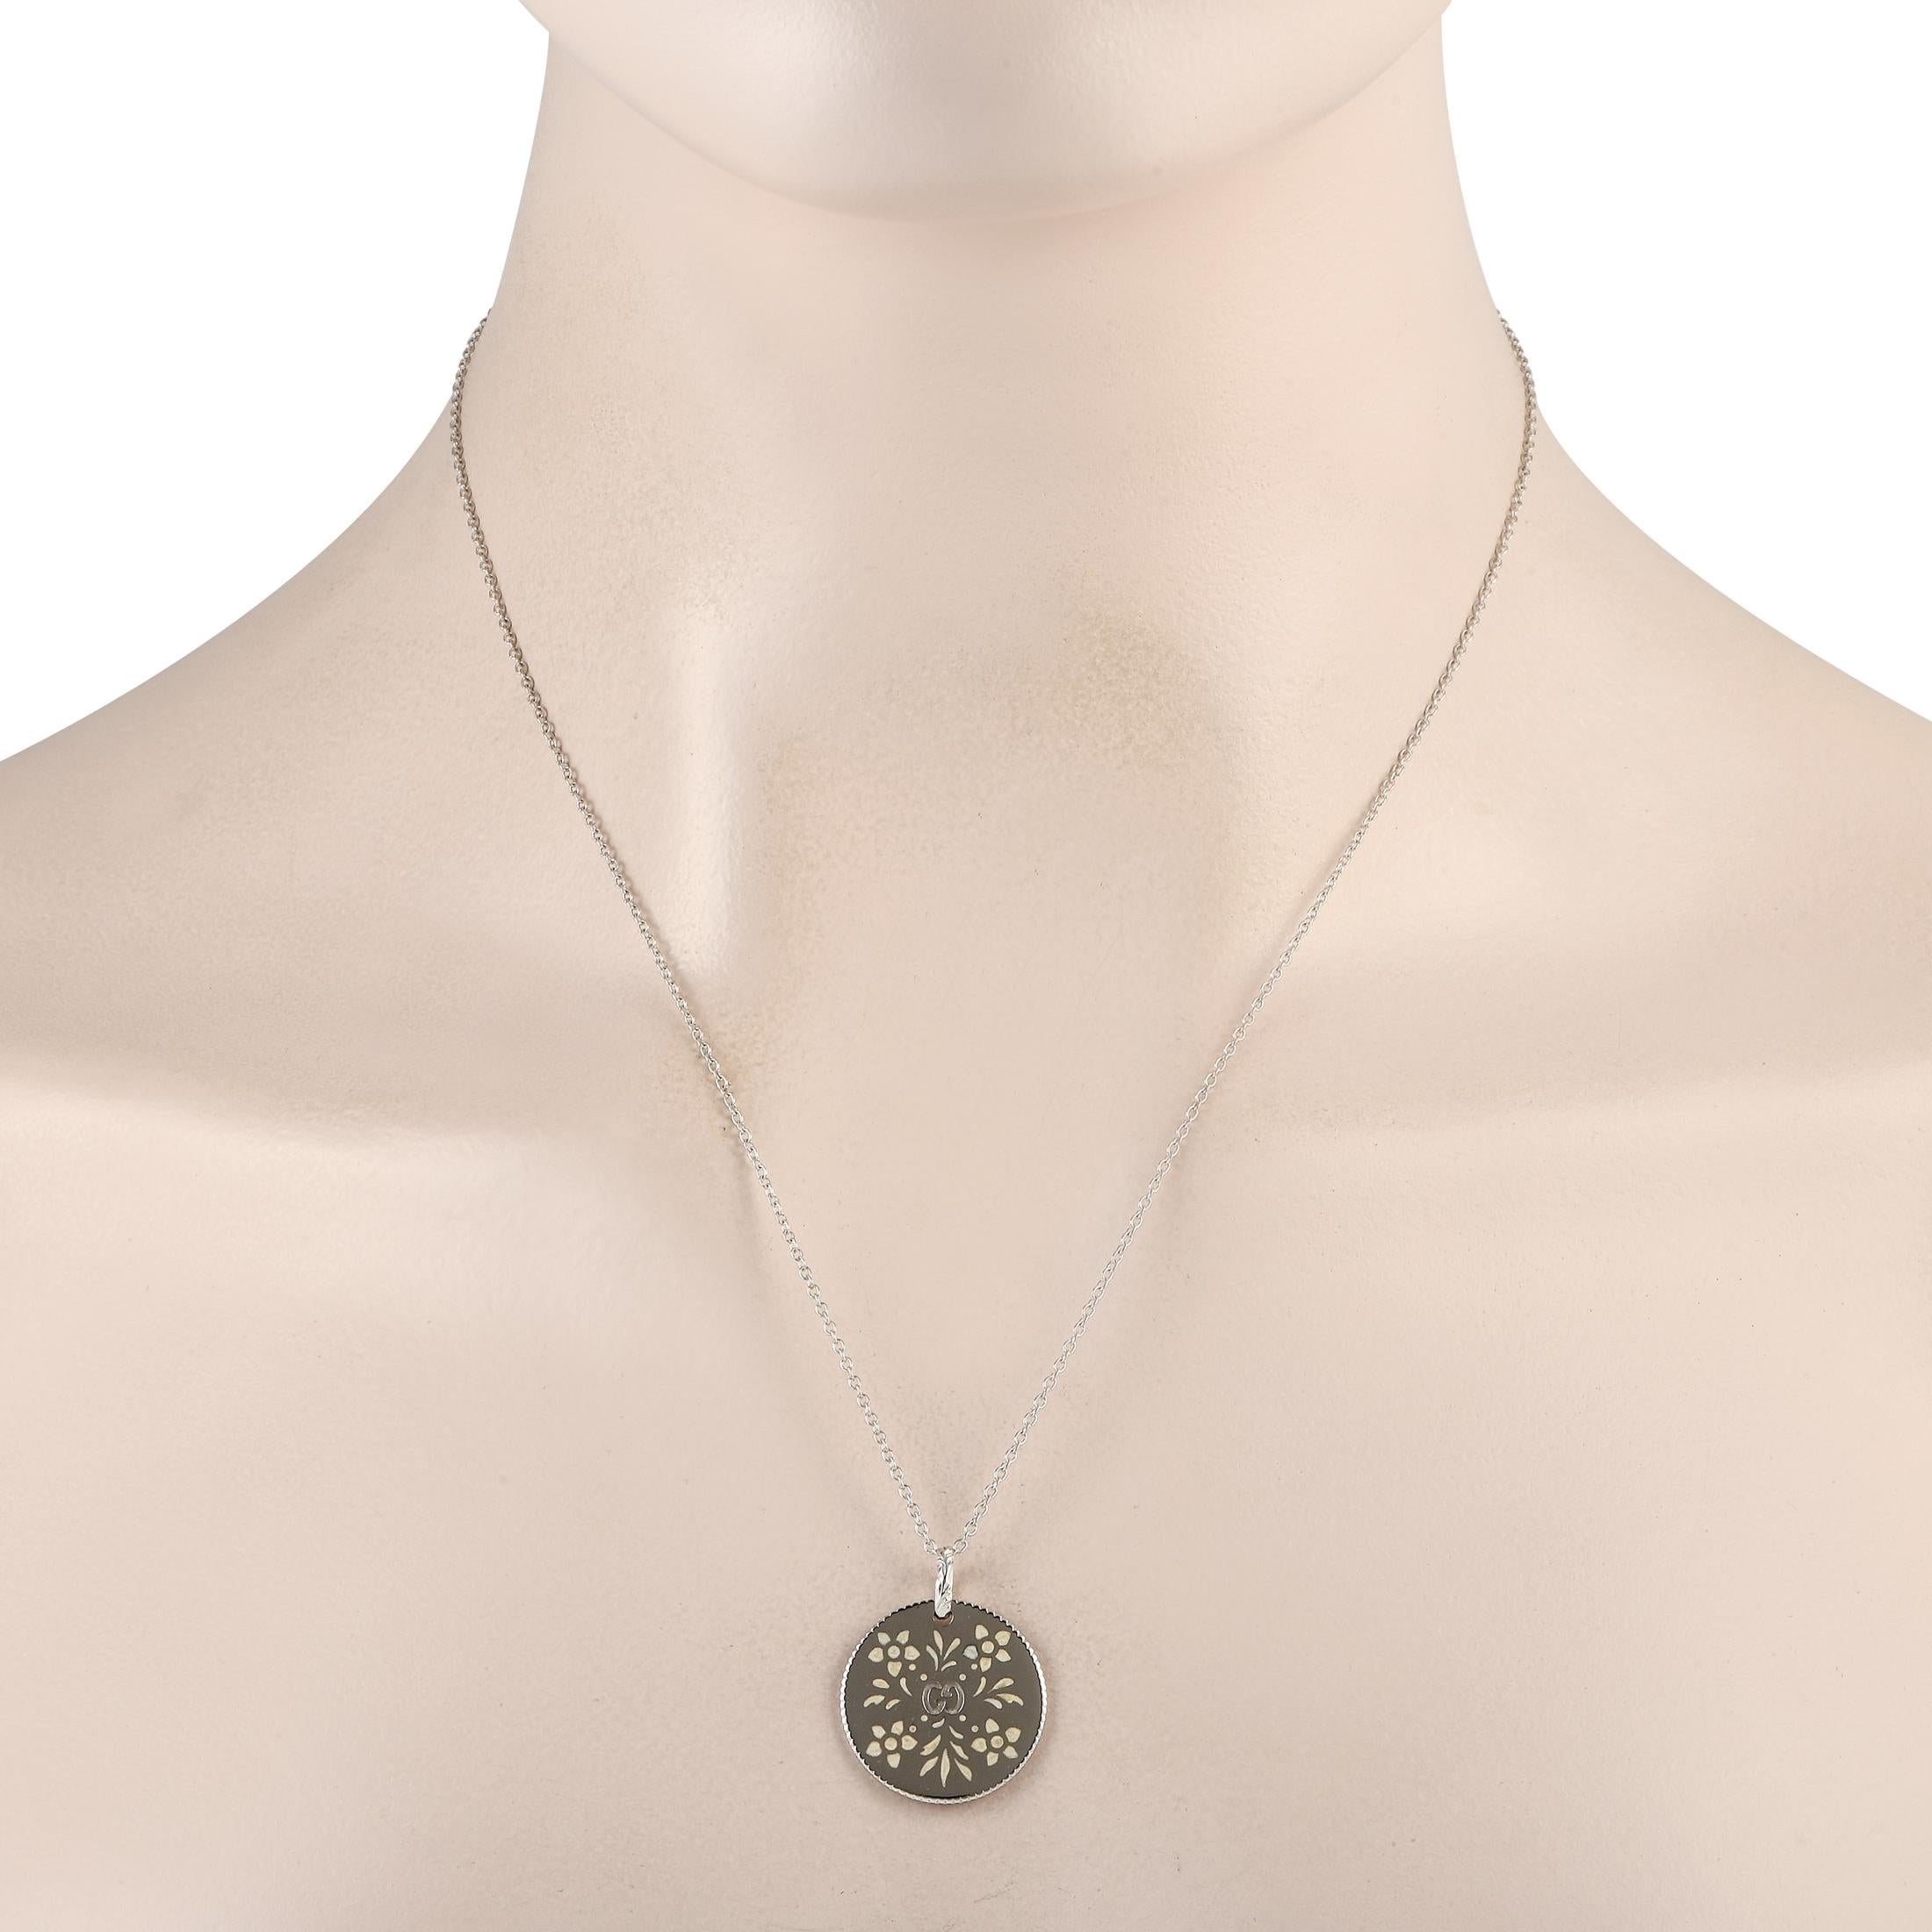 Make a stunning statement by adding this luxurious Gucci necklace to any ensemble. Suspended from a 20.0 chain, youll find an 18K White Gold pendant measuring 1.0 long by 0.80 wide. The iconic Gucci logo engraved at the center offers a fabulous